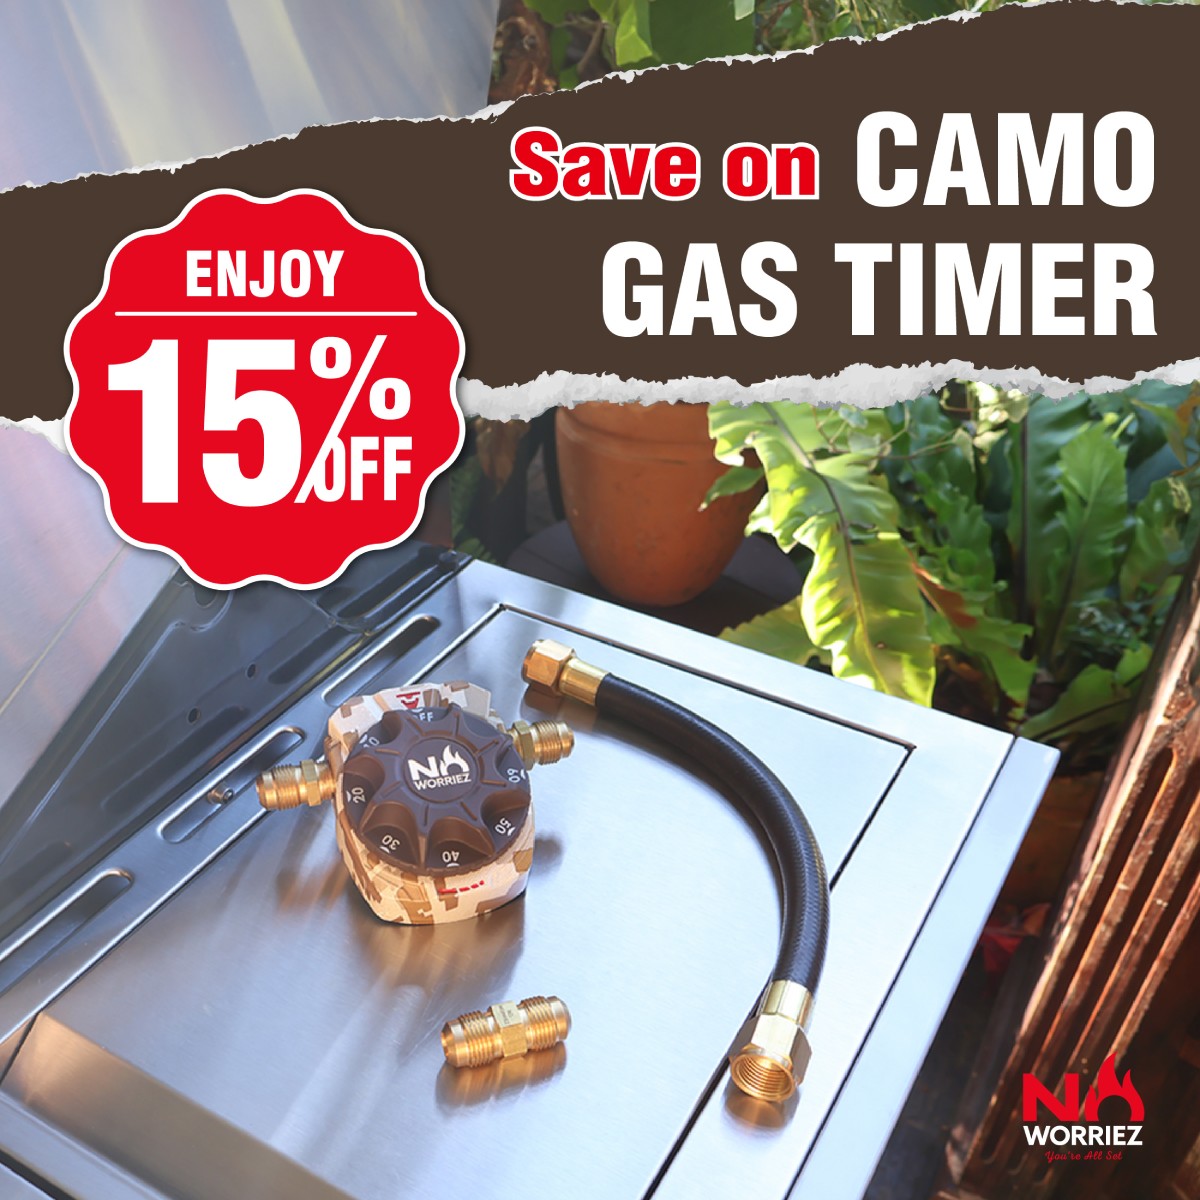 April Discount Event Save On CAMO GAS TIMER No Worriez BBQ gas grill kit